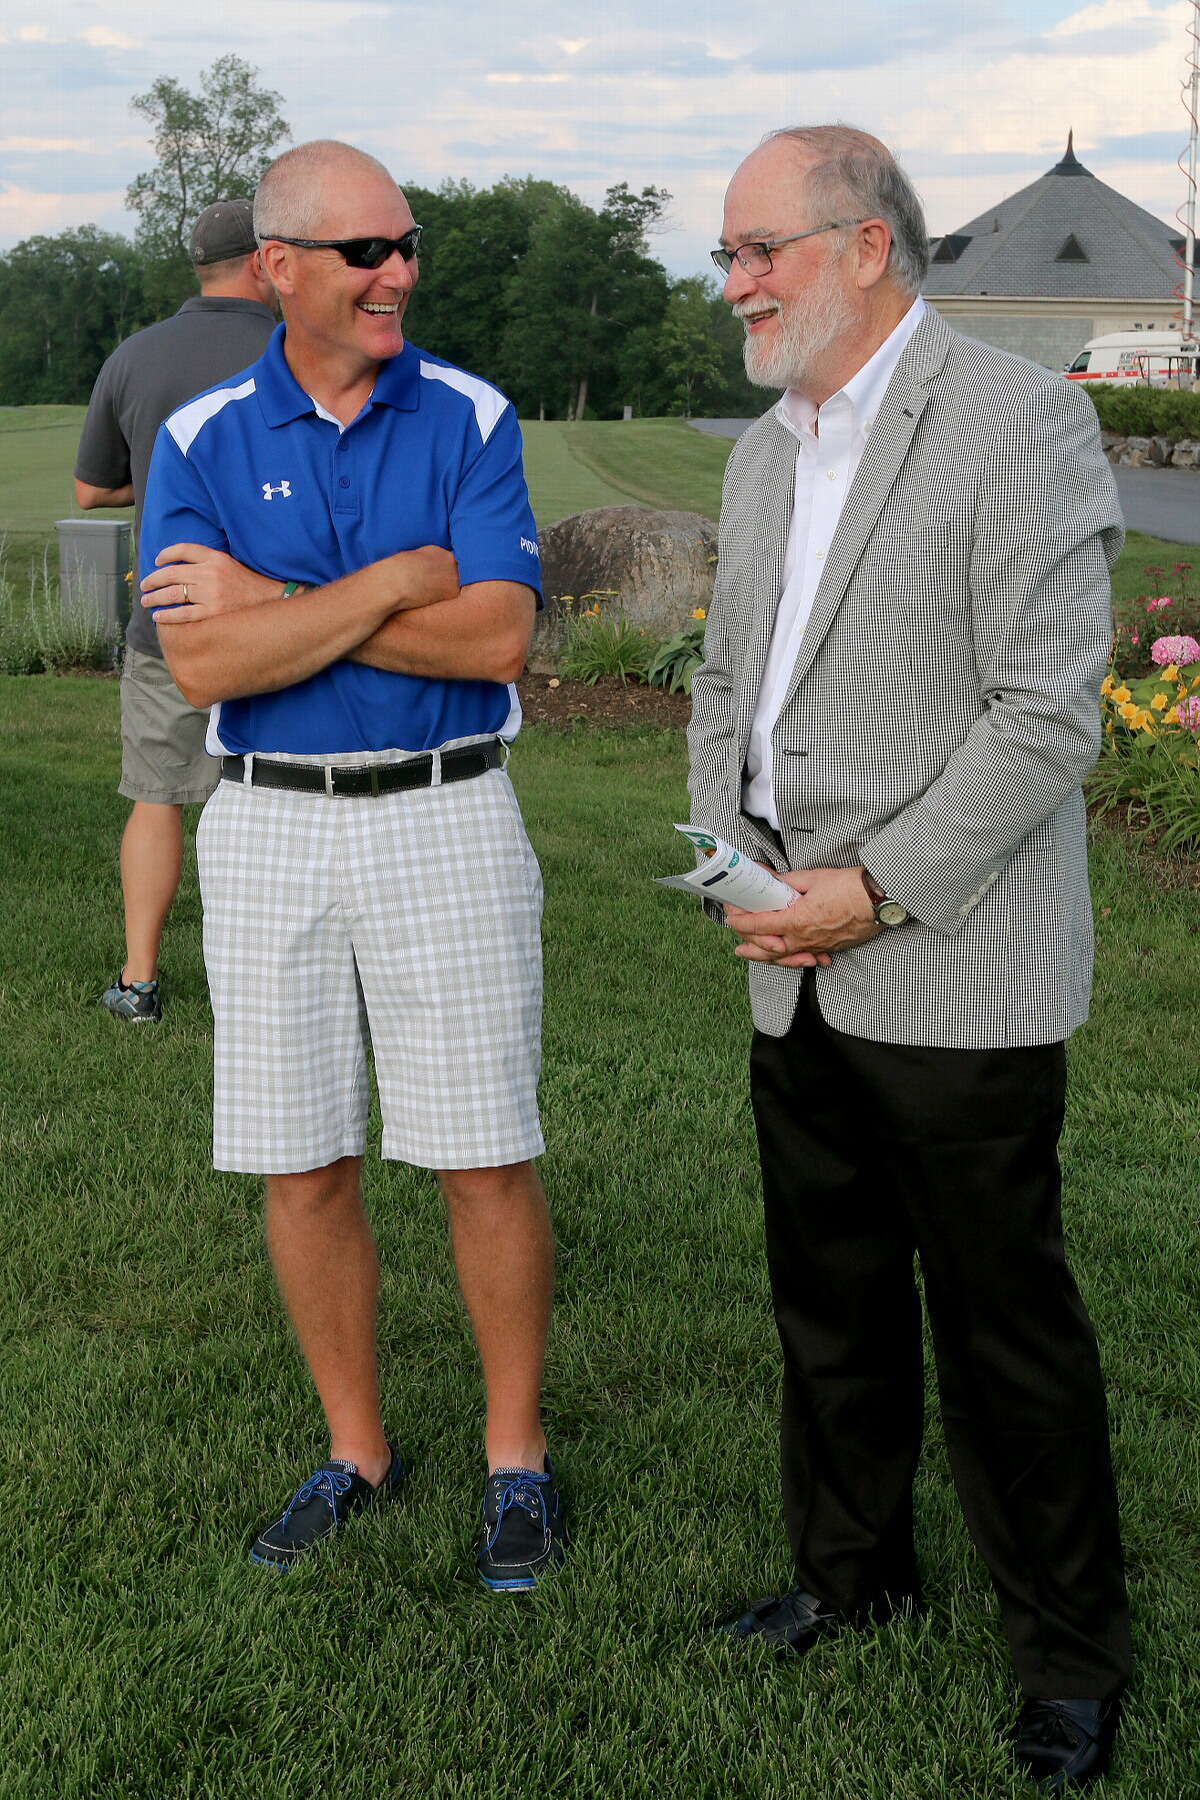 Were you Seen at the Northern Rivers Family Services Summer Celebration and Golf Tournament, to benefit Northern Rivers Family Services, at Saratoga National Golf Club in Saratoga Springs on Tuesday, July 14, 2015?